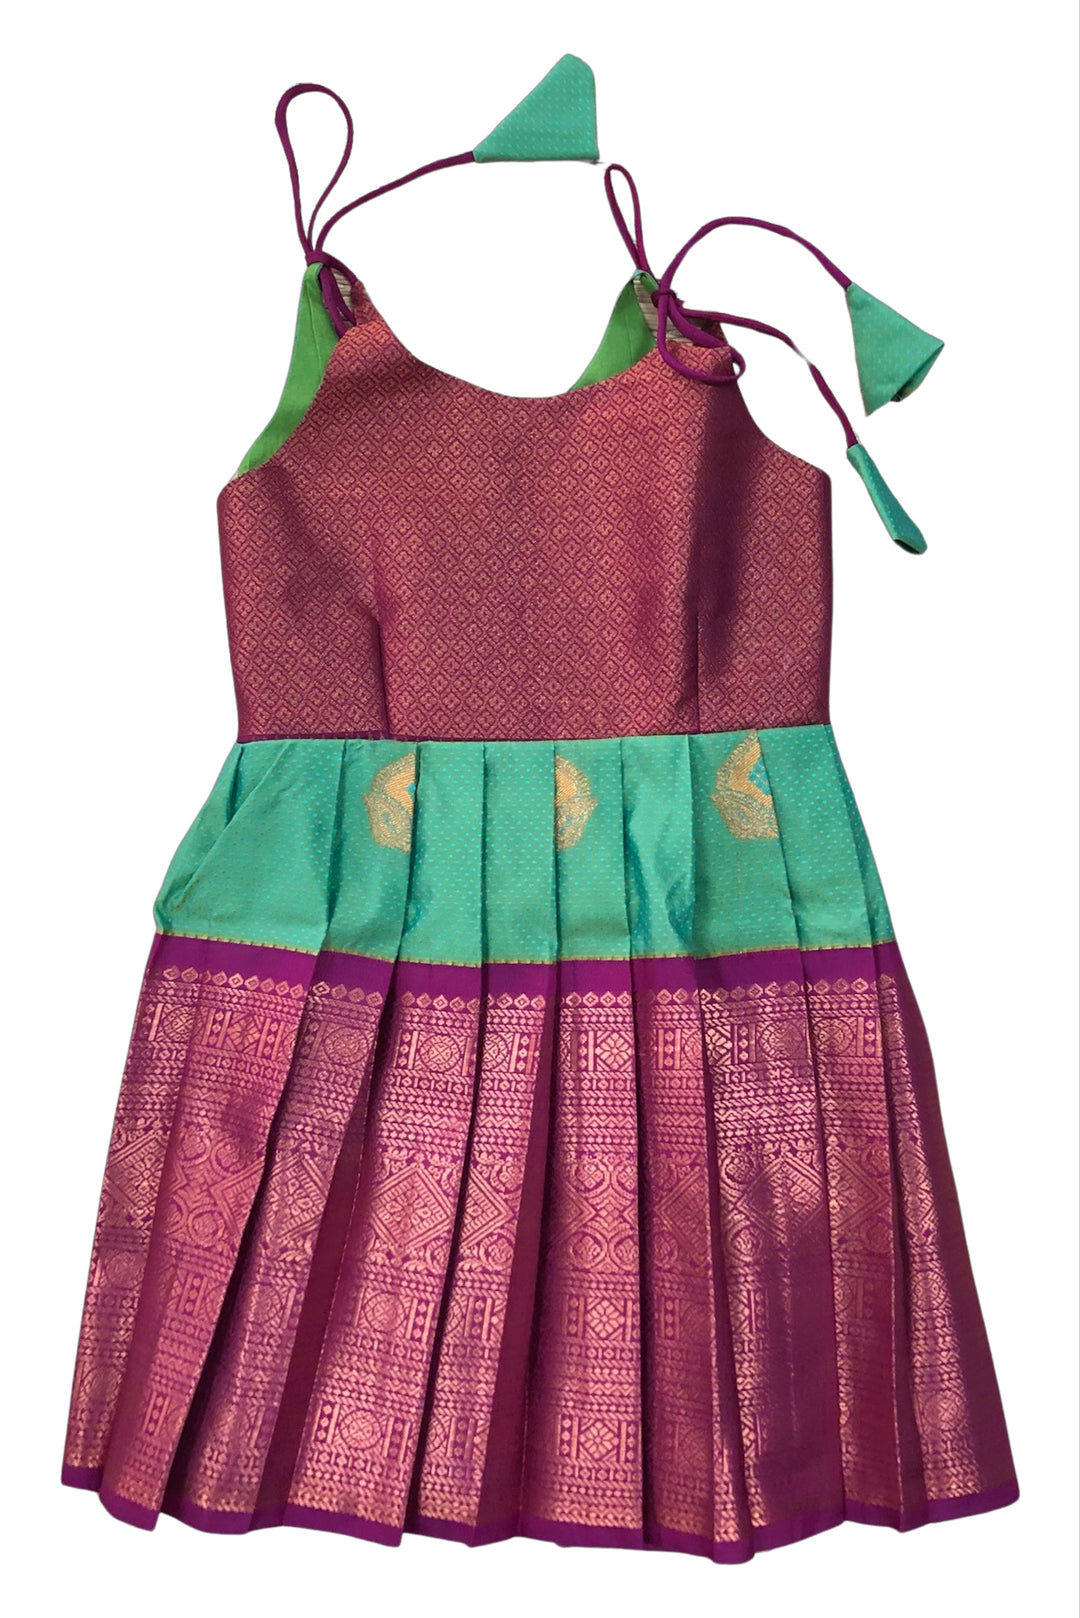 The Nesavu Tie-up Frock Deep Pink and Green Silk Tie-Up Frock with Gold Accents - Vibrant Party Dress Nesavu 18 (2Y) / Pink / Style 1 T299A-18 Deep Pink & Green Party Silk Frock | Luxurious Dress with Gold Patterns | The Nesavu